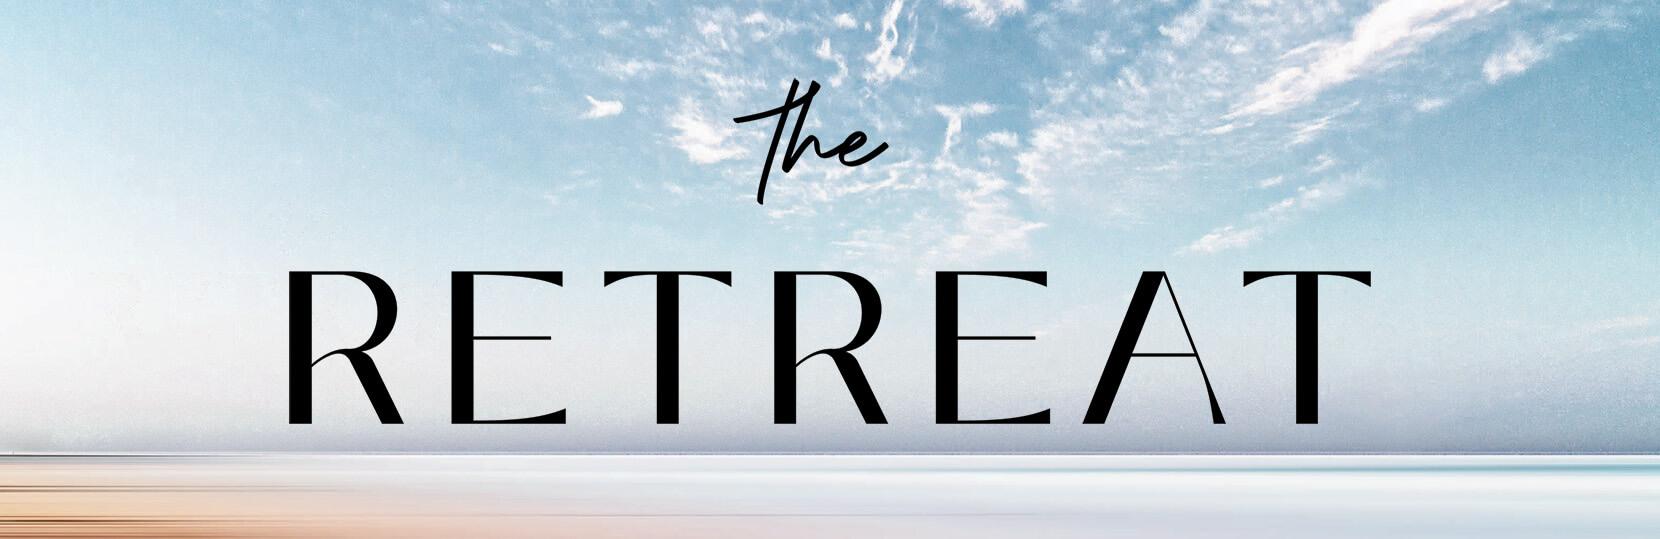 The retreat logo with a calm ocean and beach with blue sky and clouds